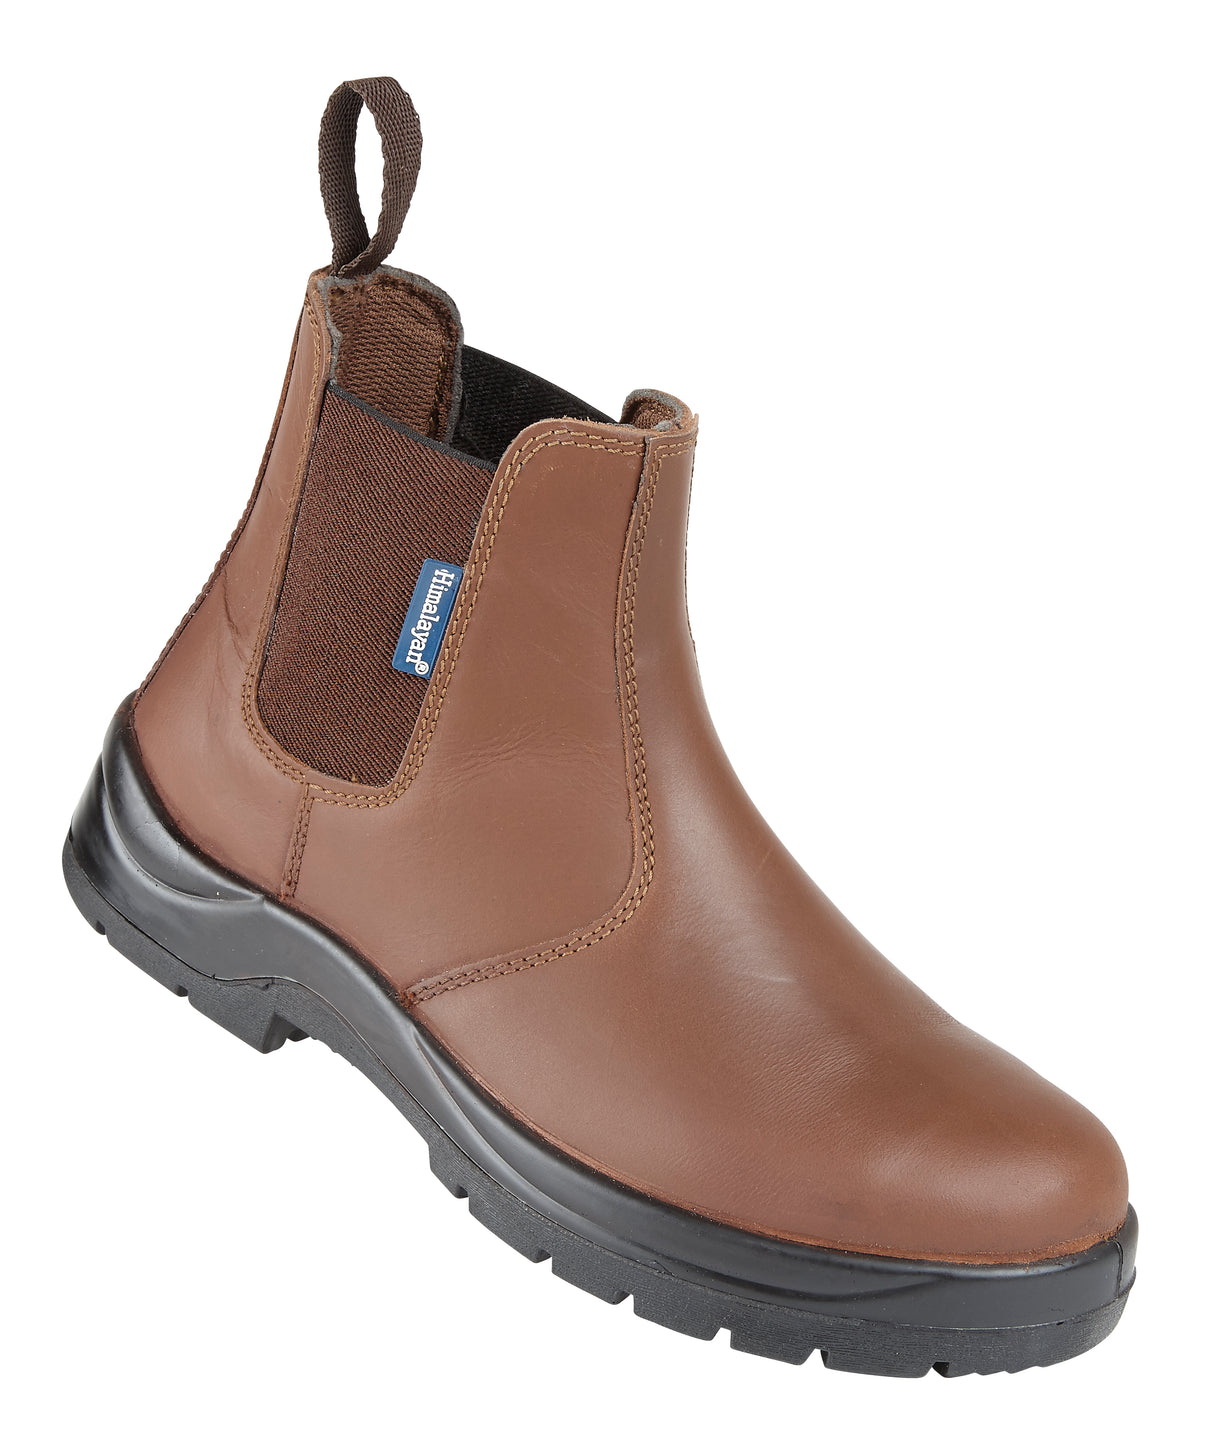 Himalayan Mens Safety Dealer Boots Brown